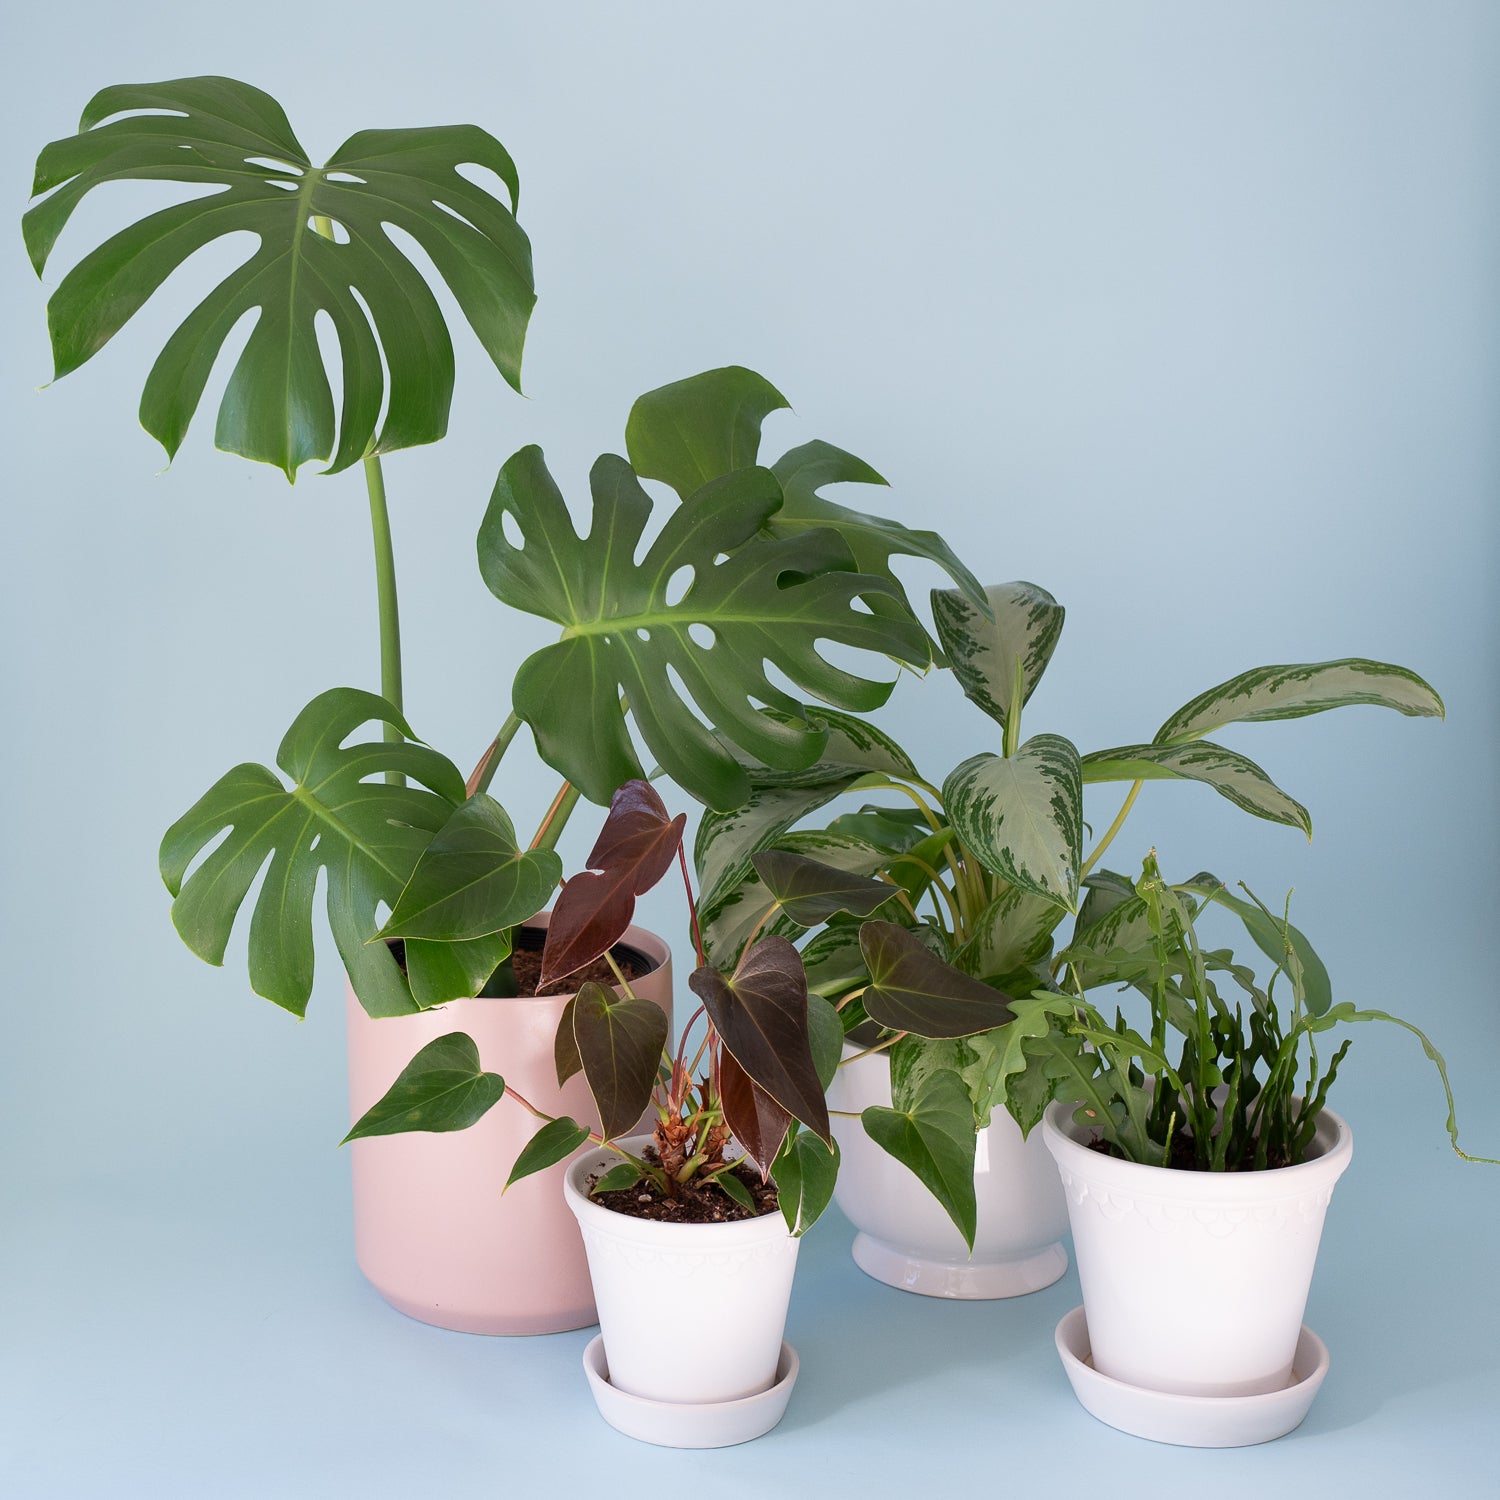 Chinese Evergreen plant has a 7 inch white ceramic catch pot. Available for local delivery in Portland, Oregon.